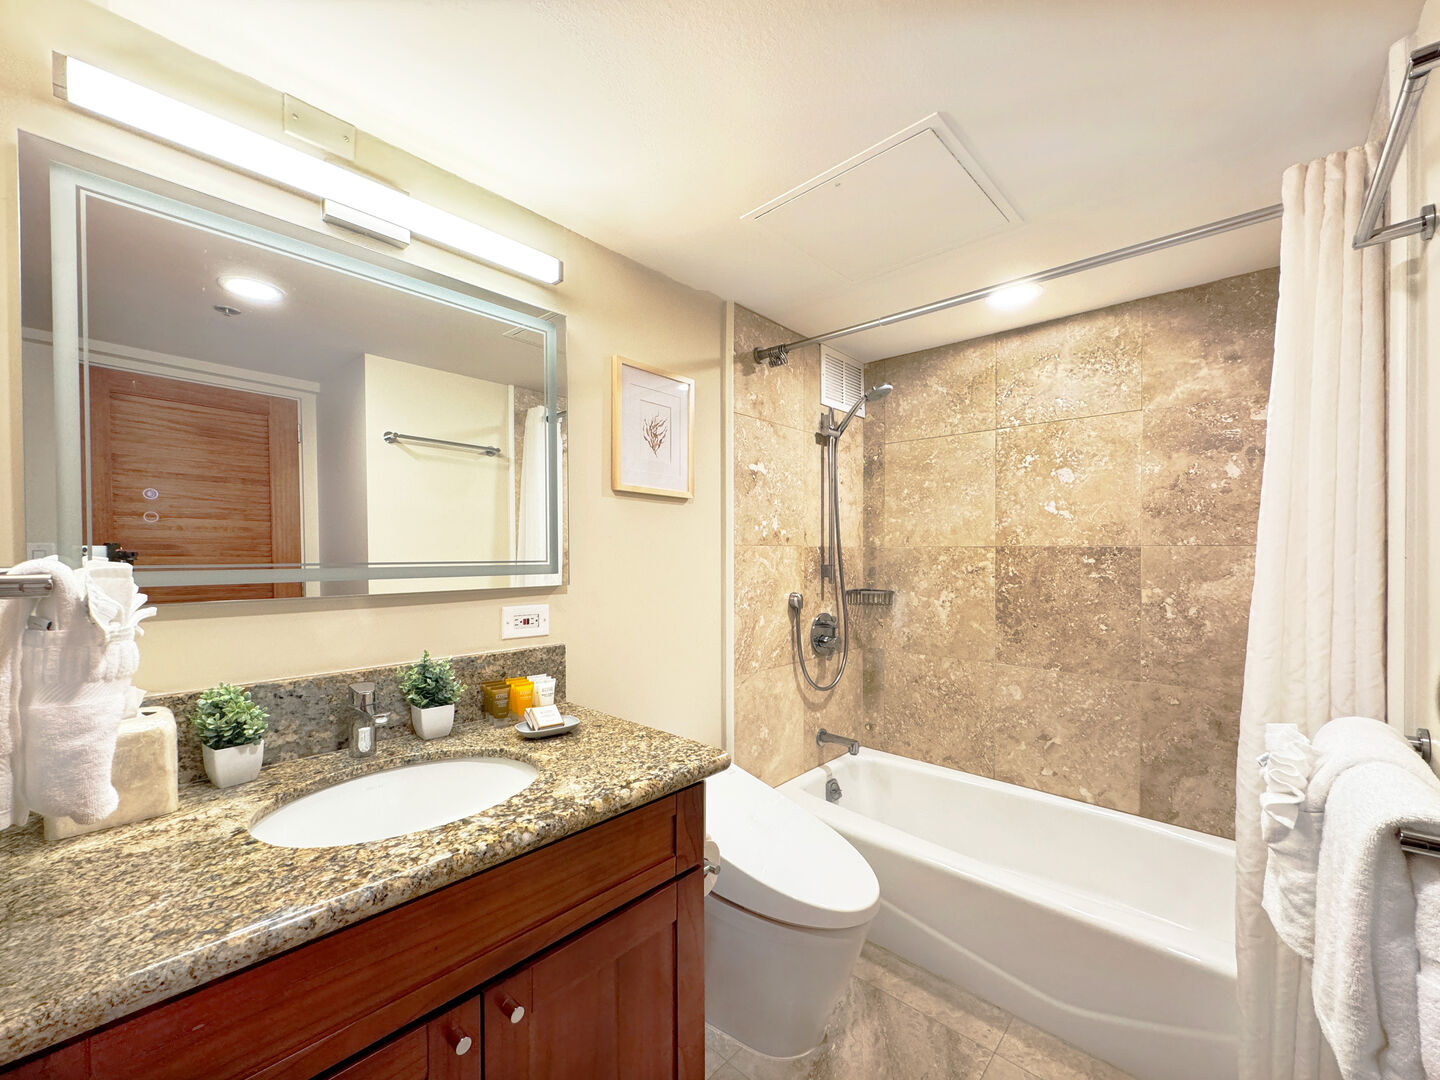 The master bedroom has a bathroom with tub and shower combo, and a vanity with cabinet.